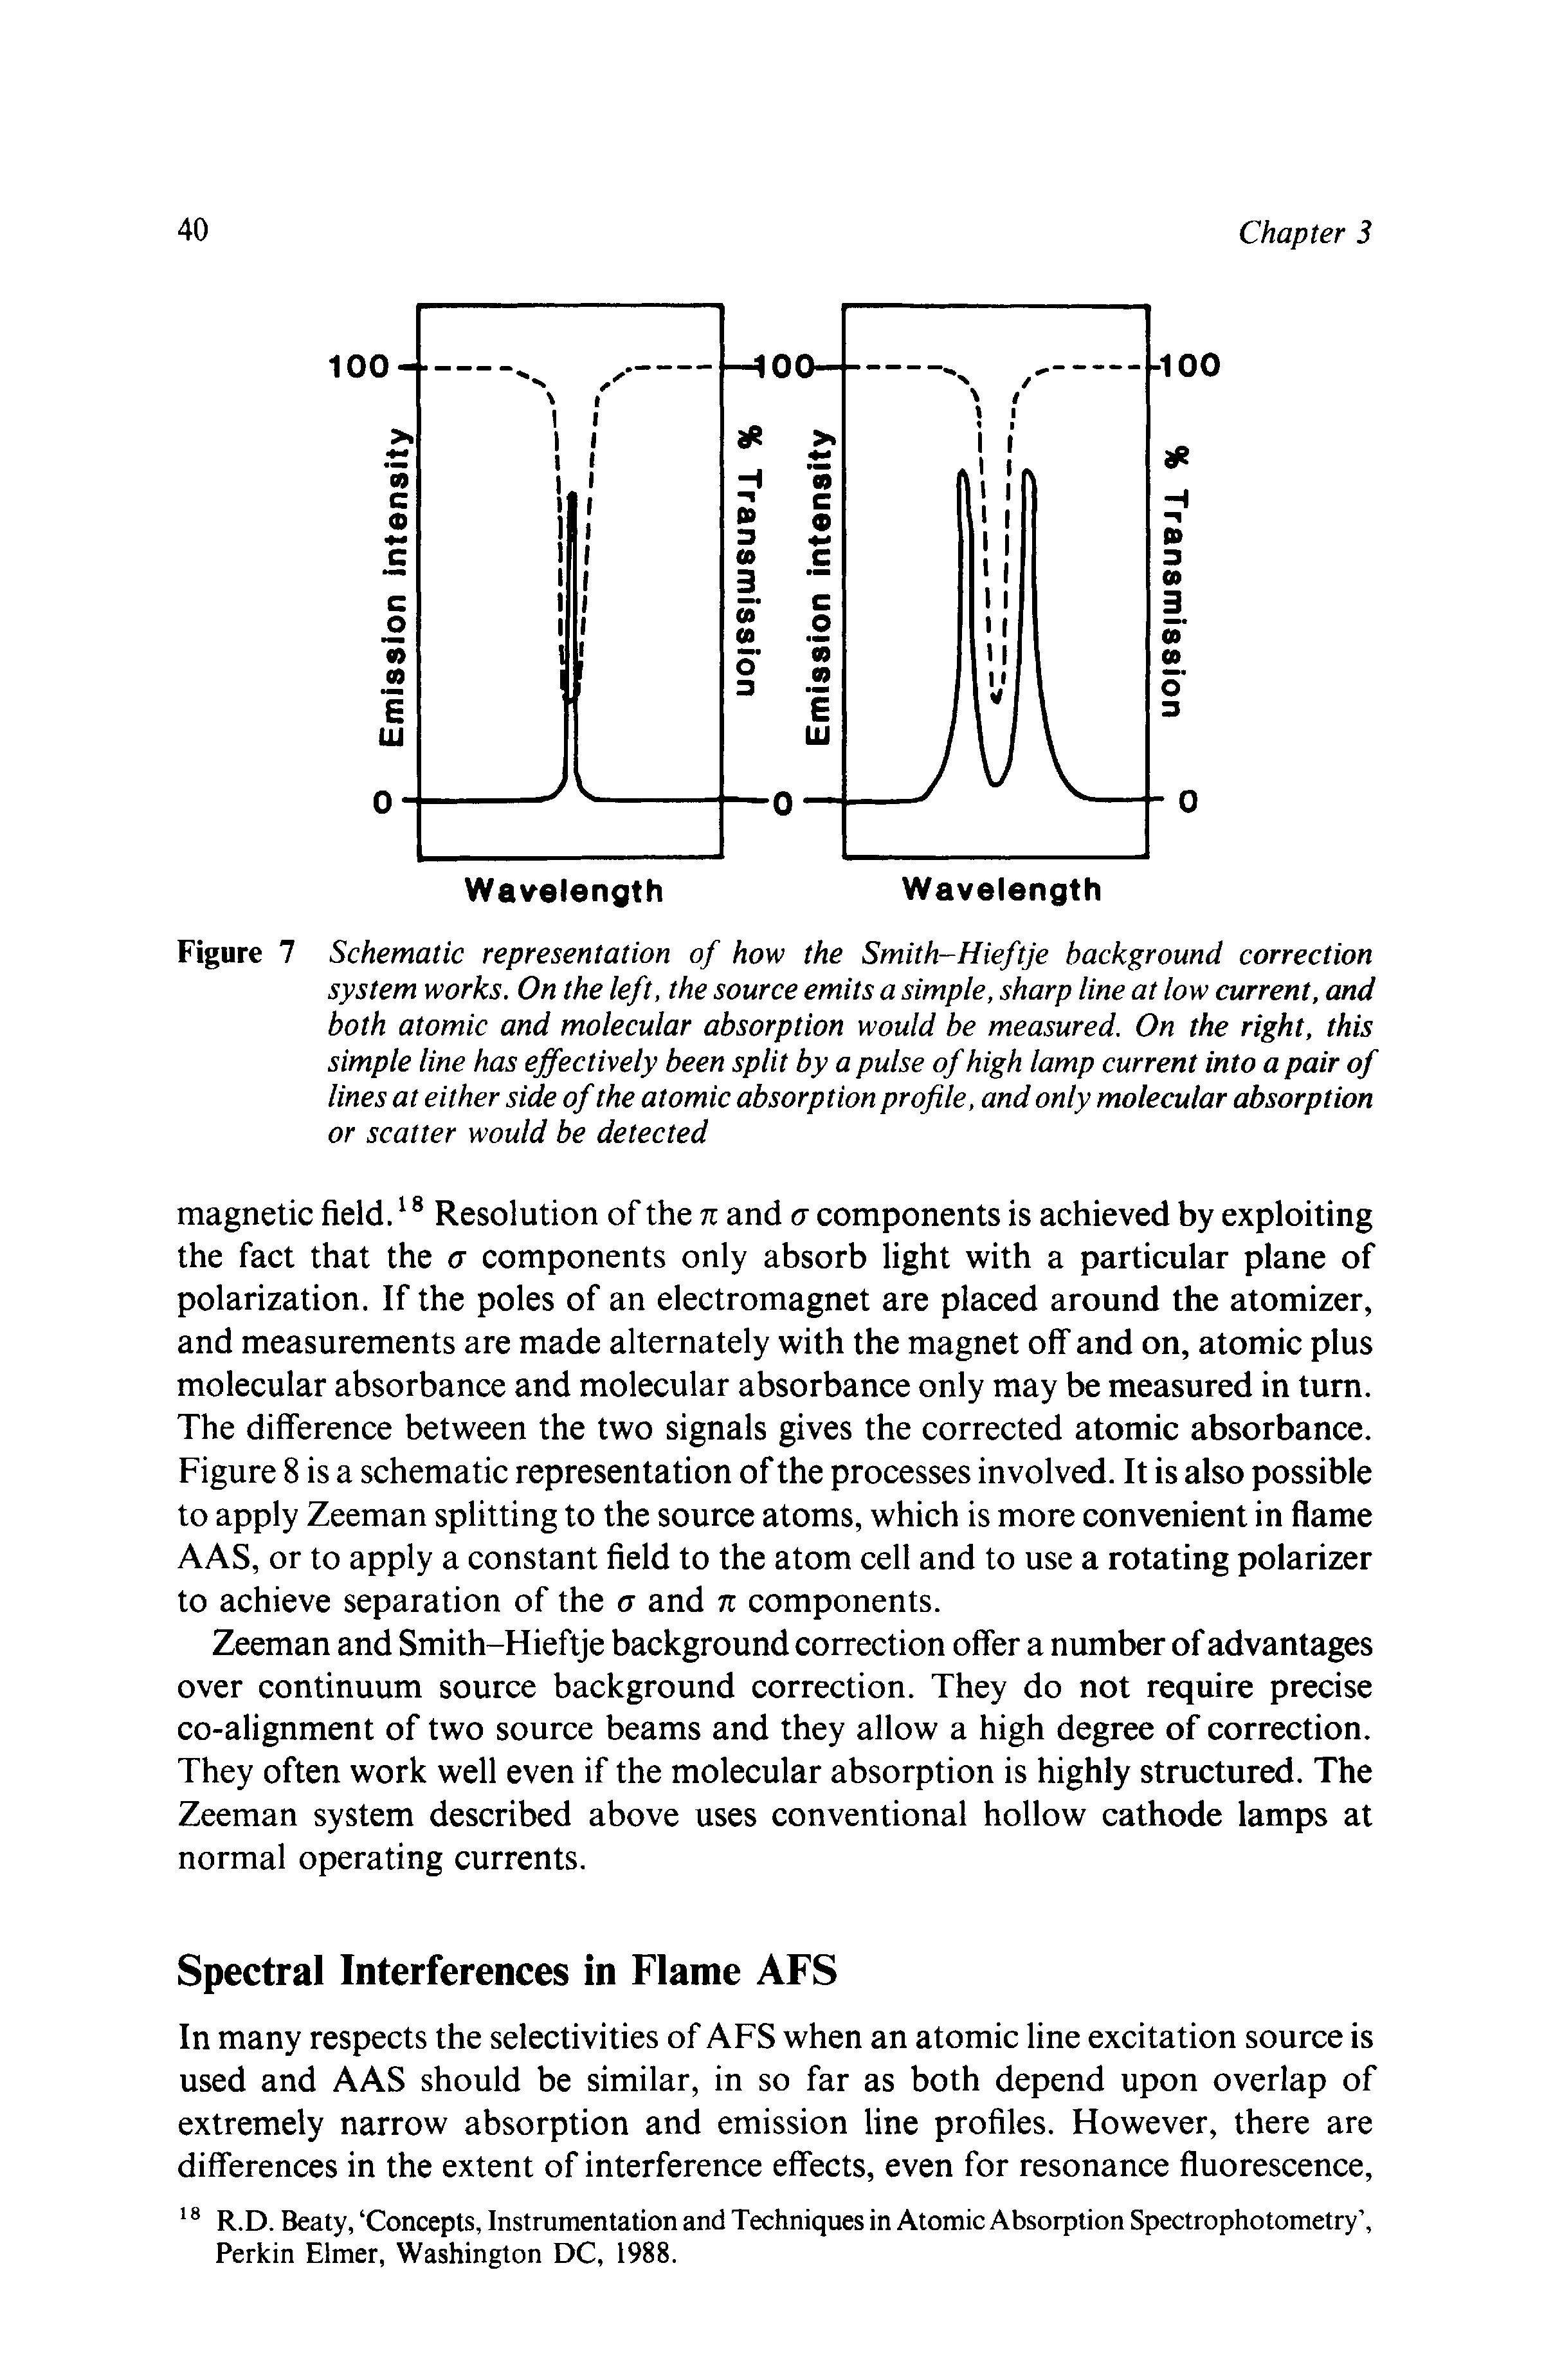 Figure 7 Schematic representation of how the Smith-Hieftje background correction system works. On the left, the source emits a simple, sharp line at low current, and both atomic and molecular absorption would be measured. On the right, this simple line has effectively been split by a pulse of high lamp current into a pair of lines at either side of the atomic absorption profile, and only molecular absorption or scatter would be detected...